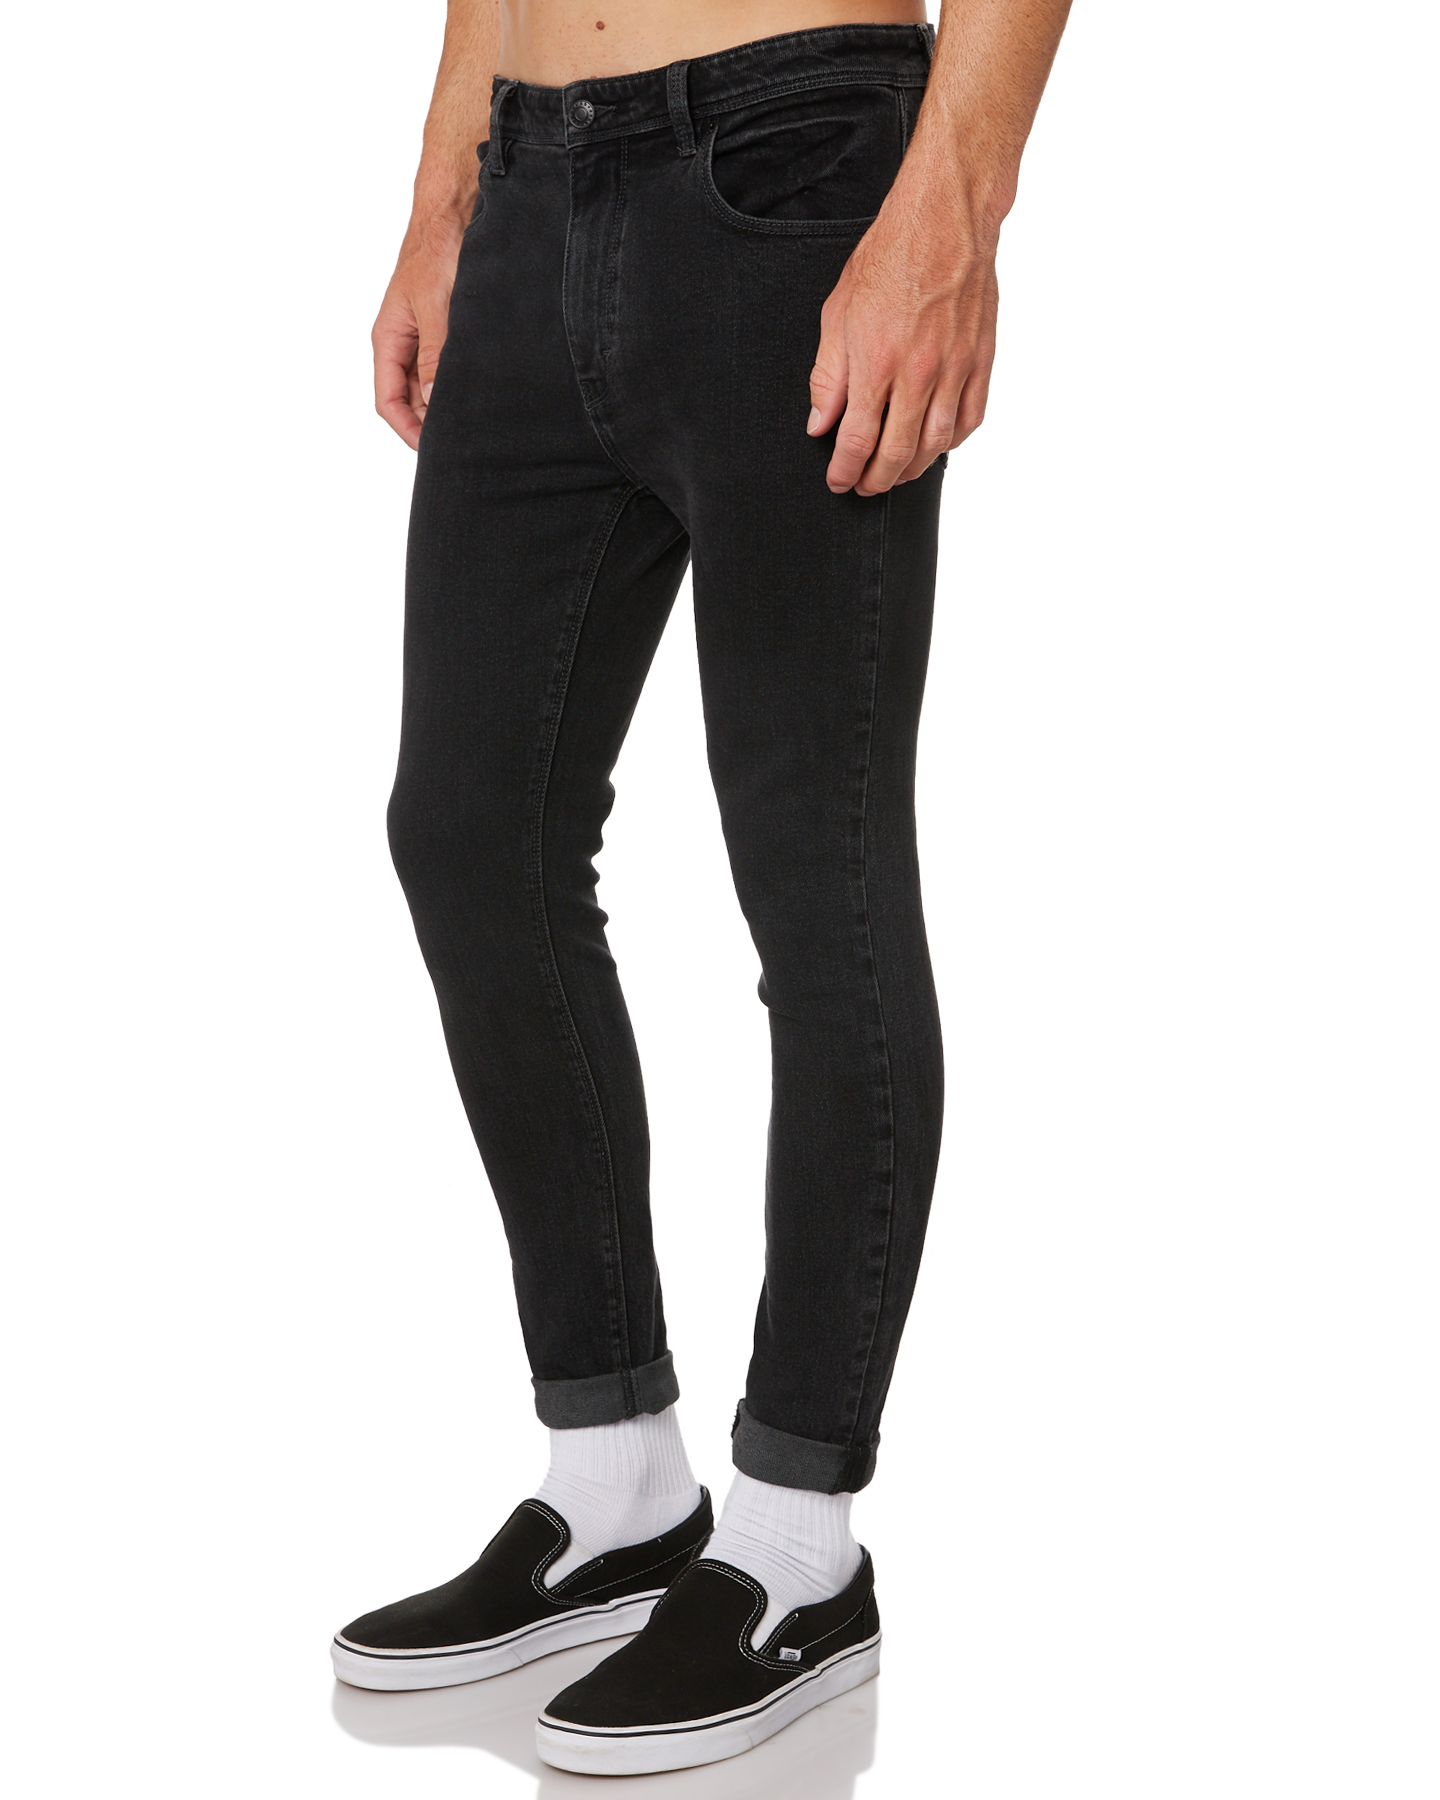 A.Brand A Dropped Skinny Turn Up Mens Jean - Ghost Black | SurfStitch